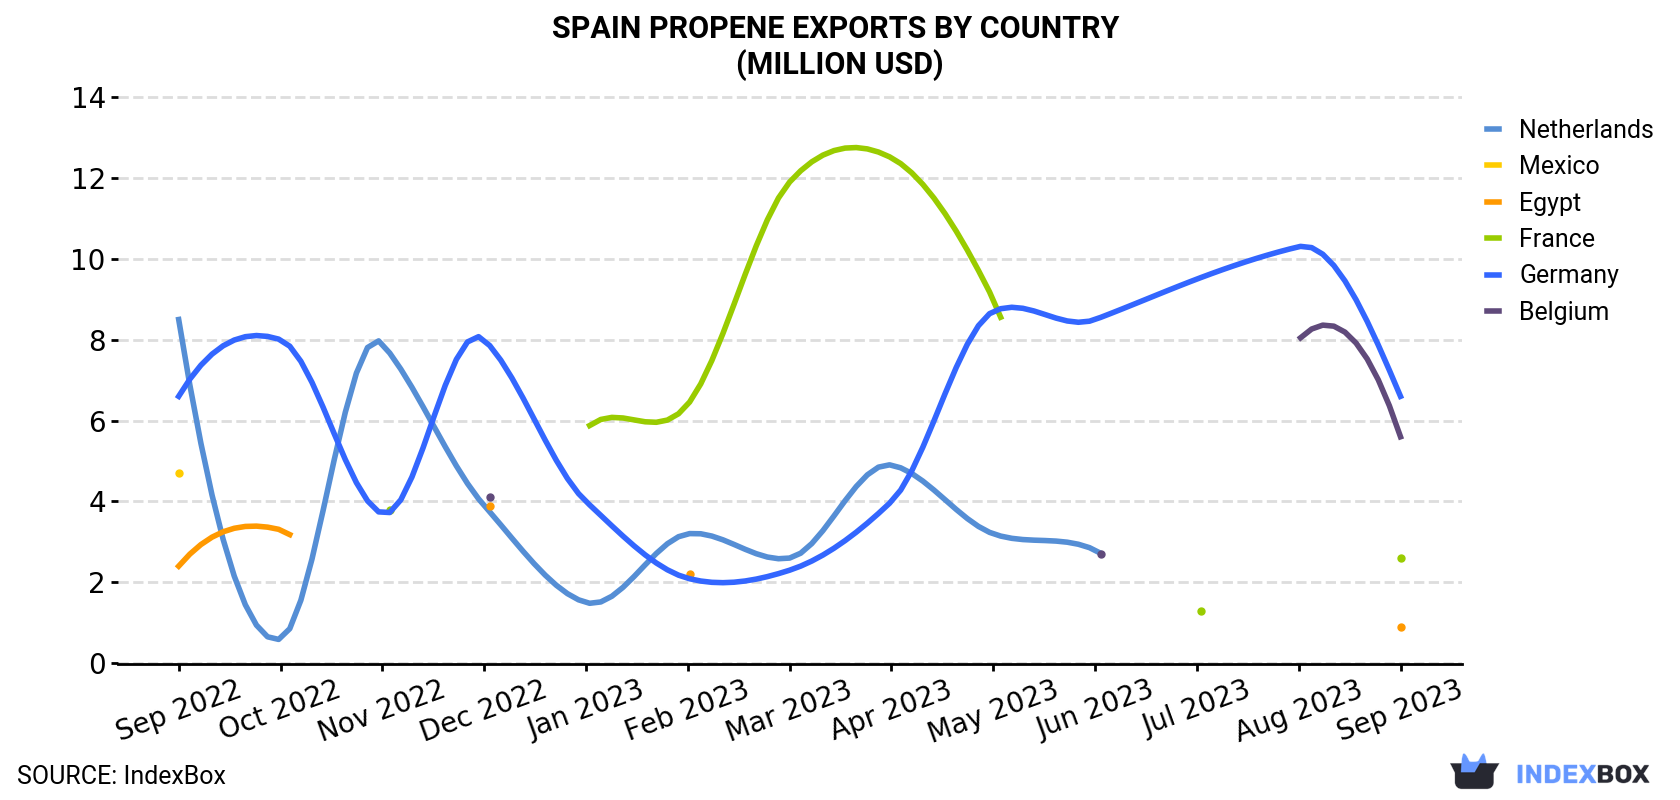 Spain Propene Exports By Country (Million USD)